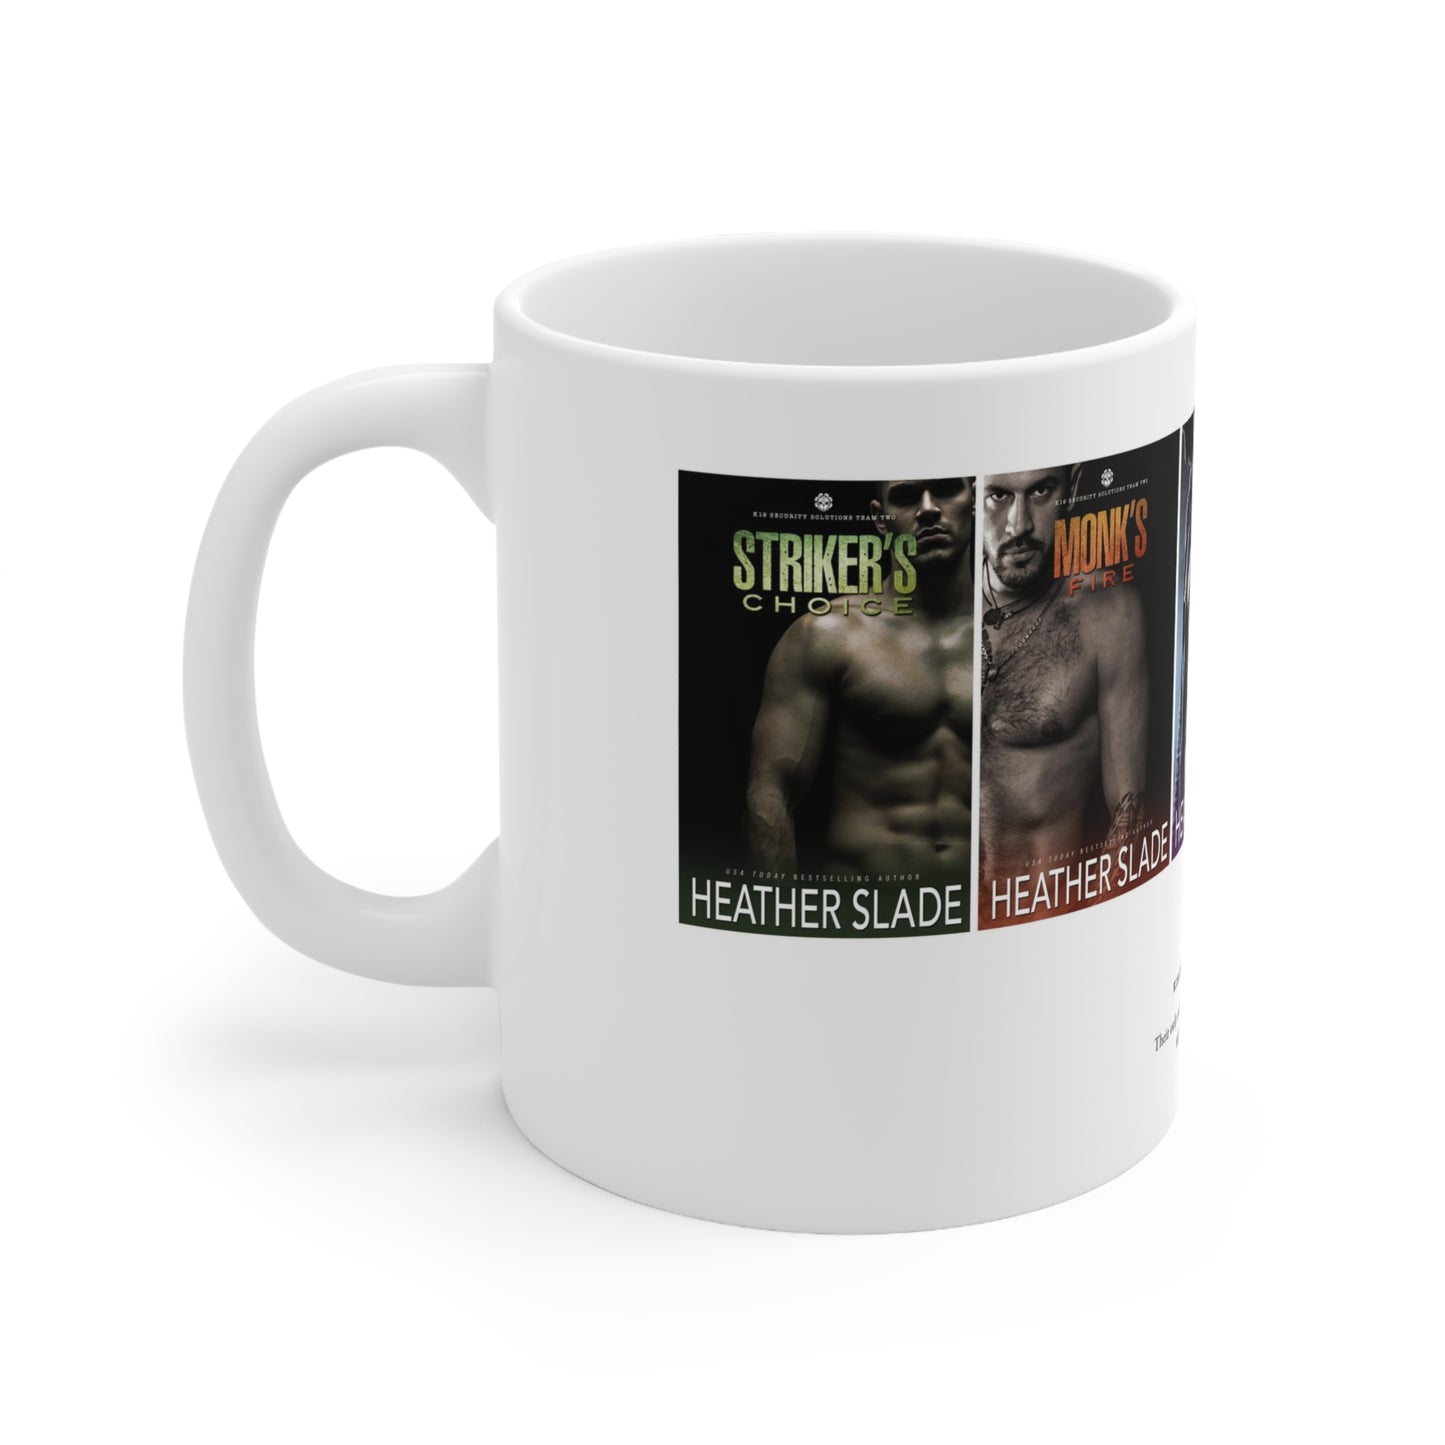 K19 Security Solutions Team Two Covers Ceramic Coffee Mug